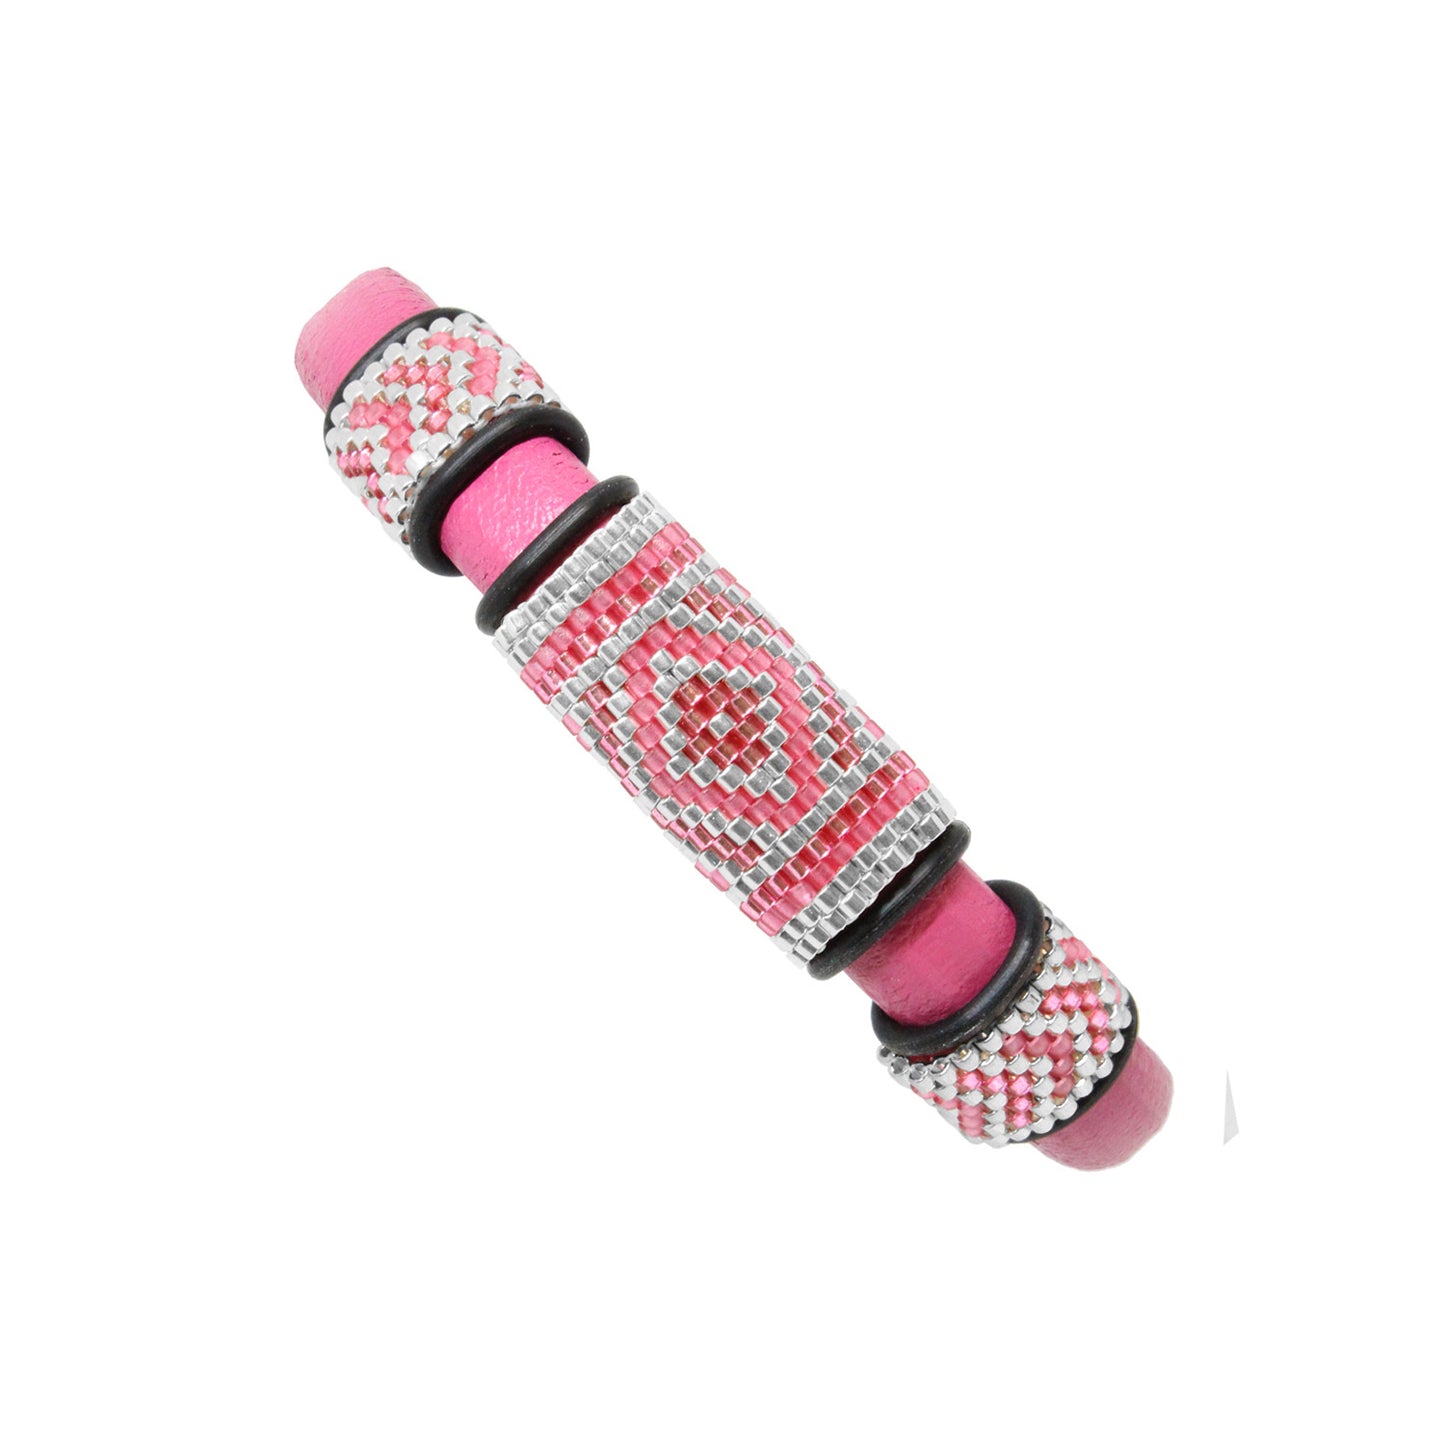 FUCHSIA PINK Geometric Bracelet / fits 6.5 to 7 Inch wrist size / leather with magnetic clasp